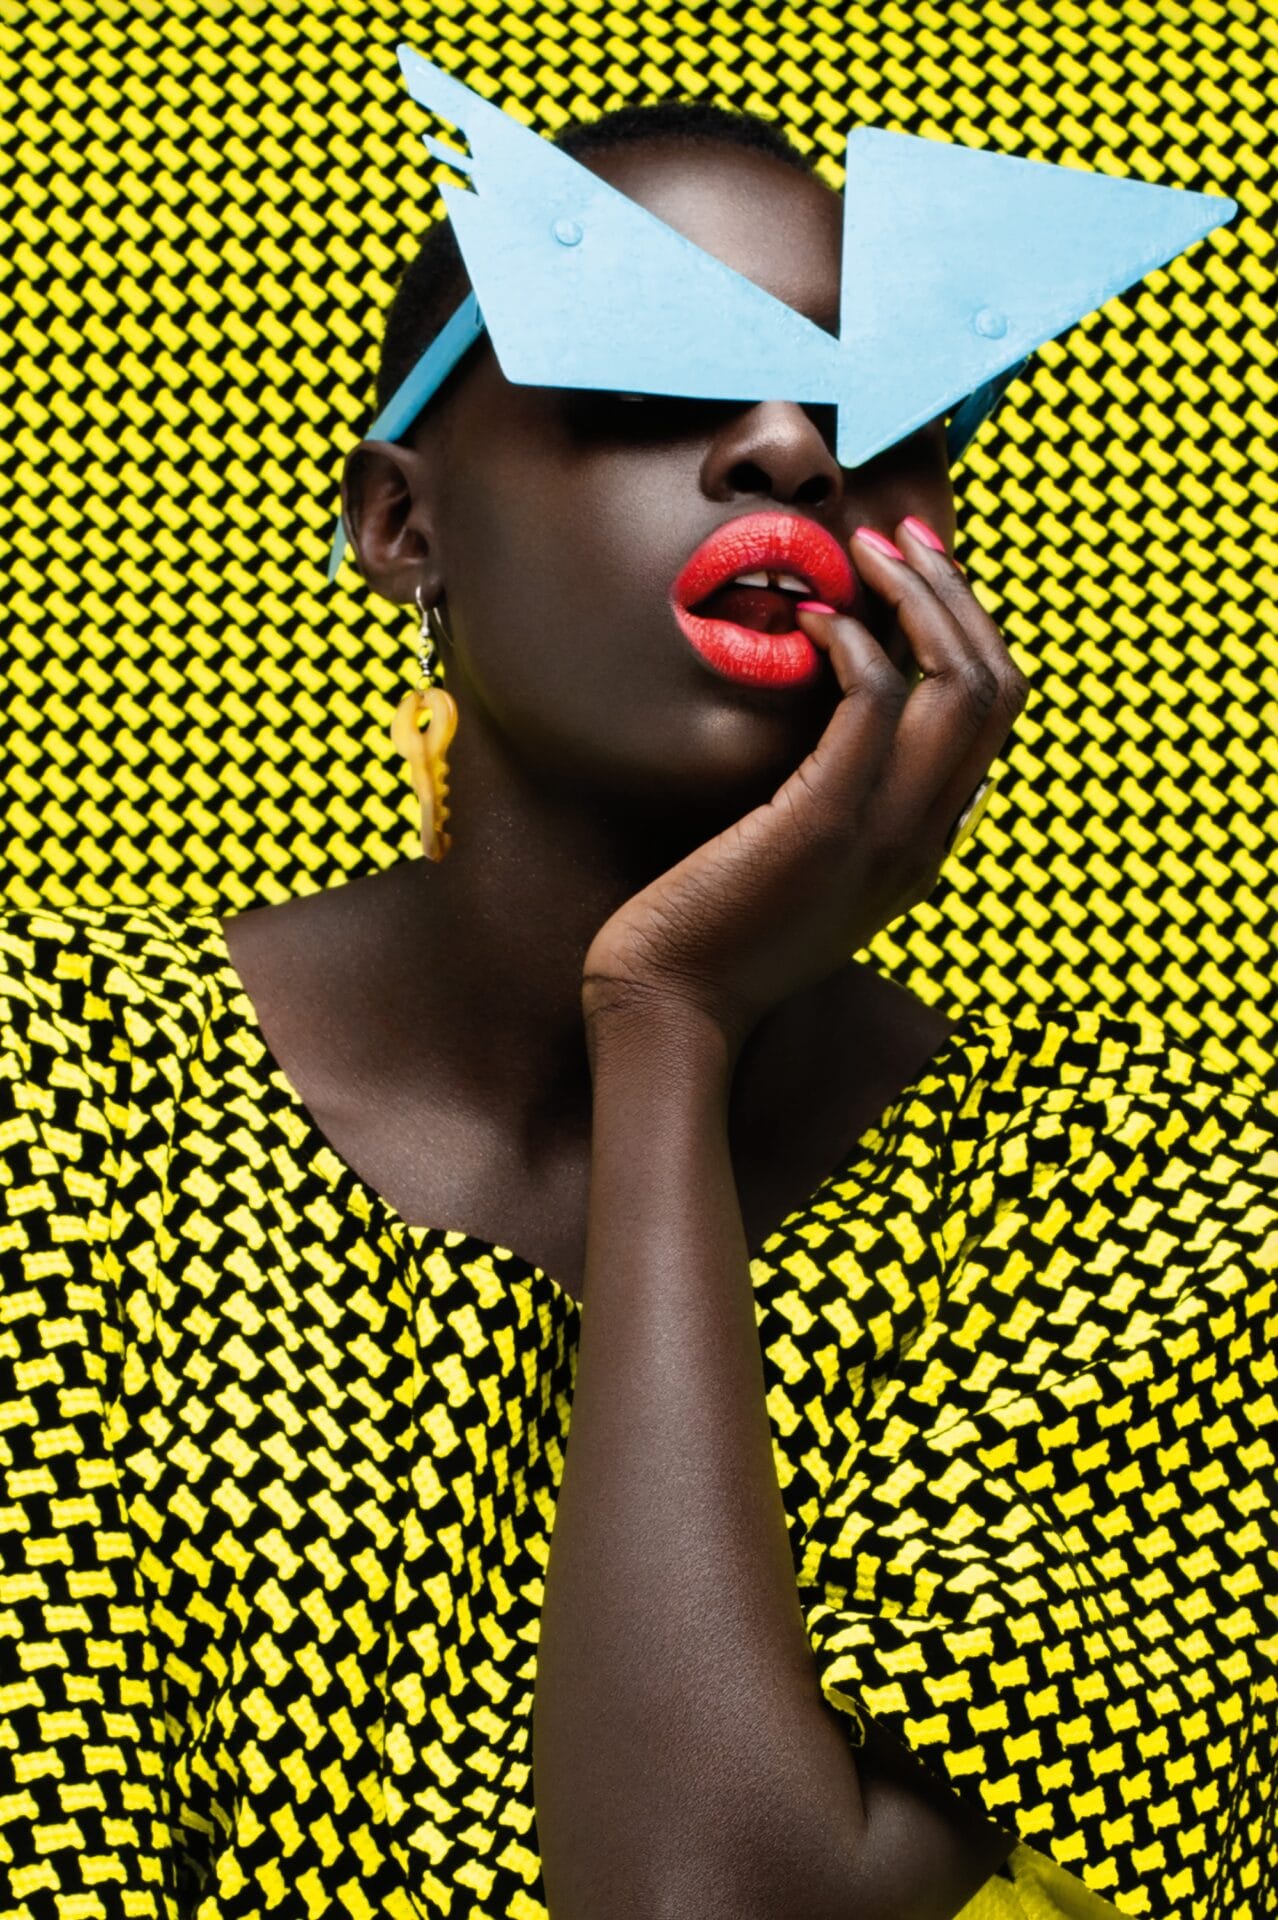 a portrait of the artist against a patterned black and yellow backdrop. she's wearing bright blue eyewear